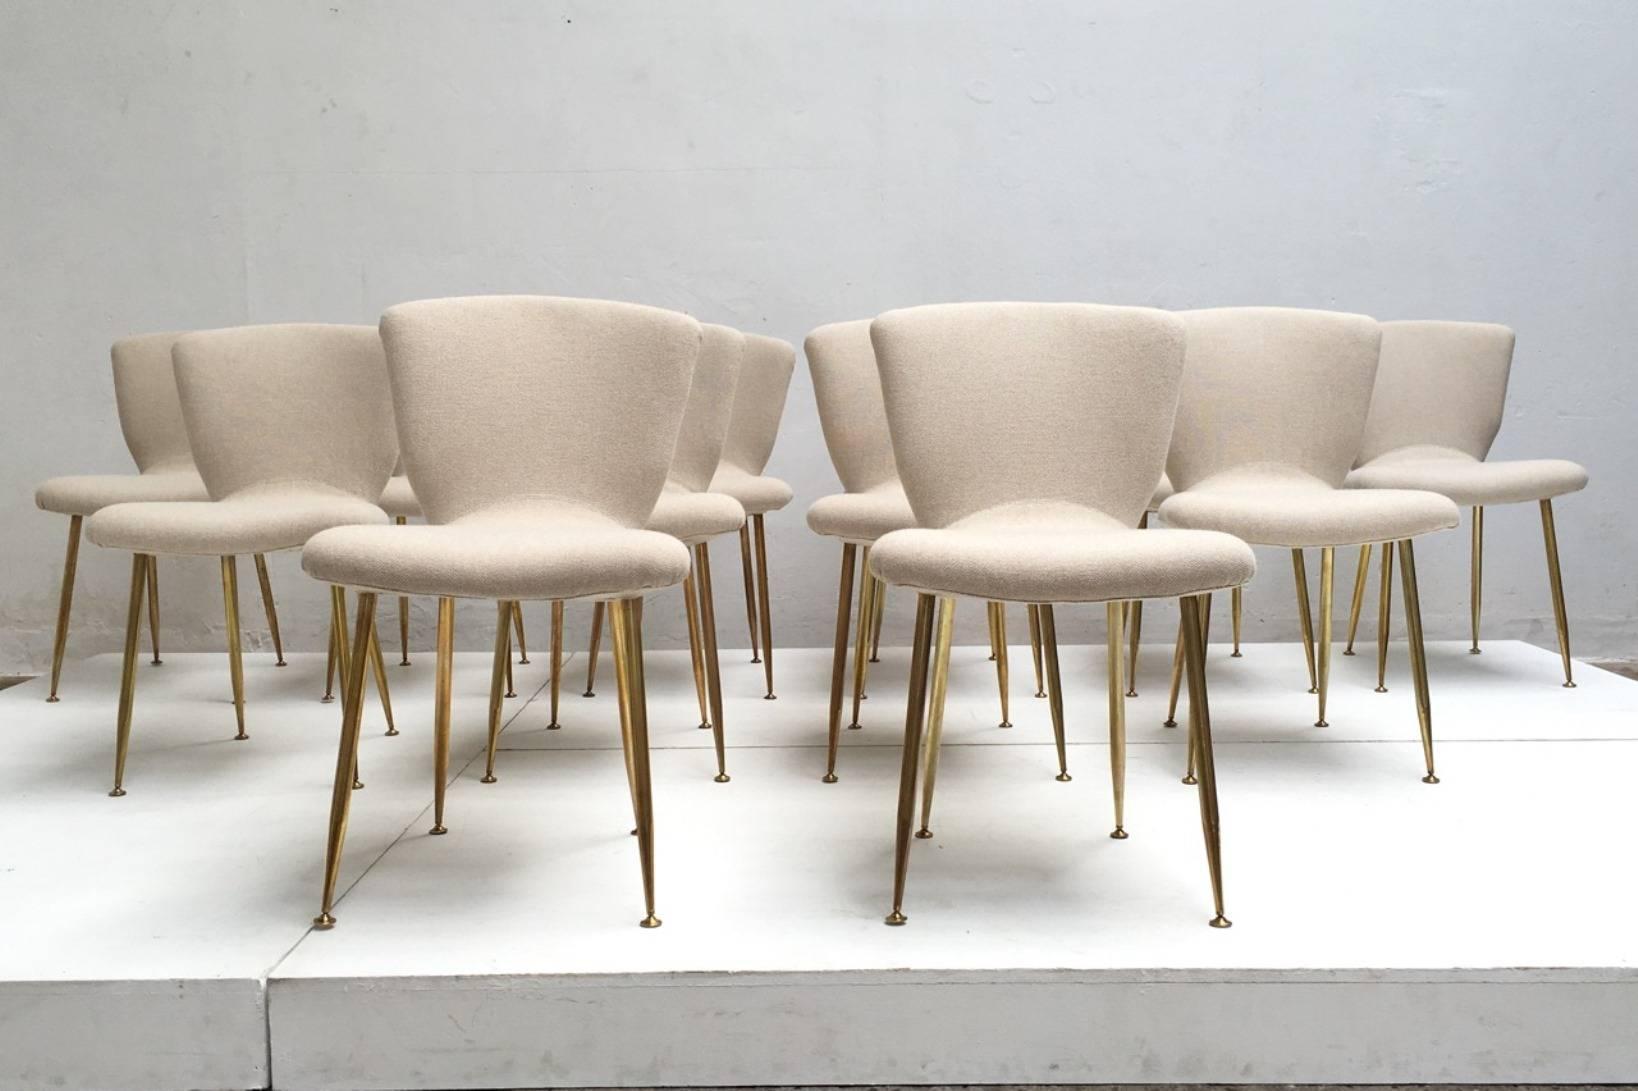 Mid-Century Modern 12 dining chairs by Louis Sognot for ARFLEX, 1959. Brass legs, Upholstery restored